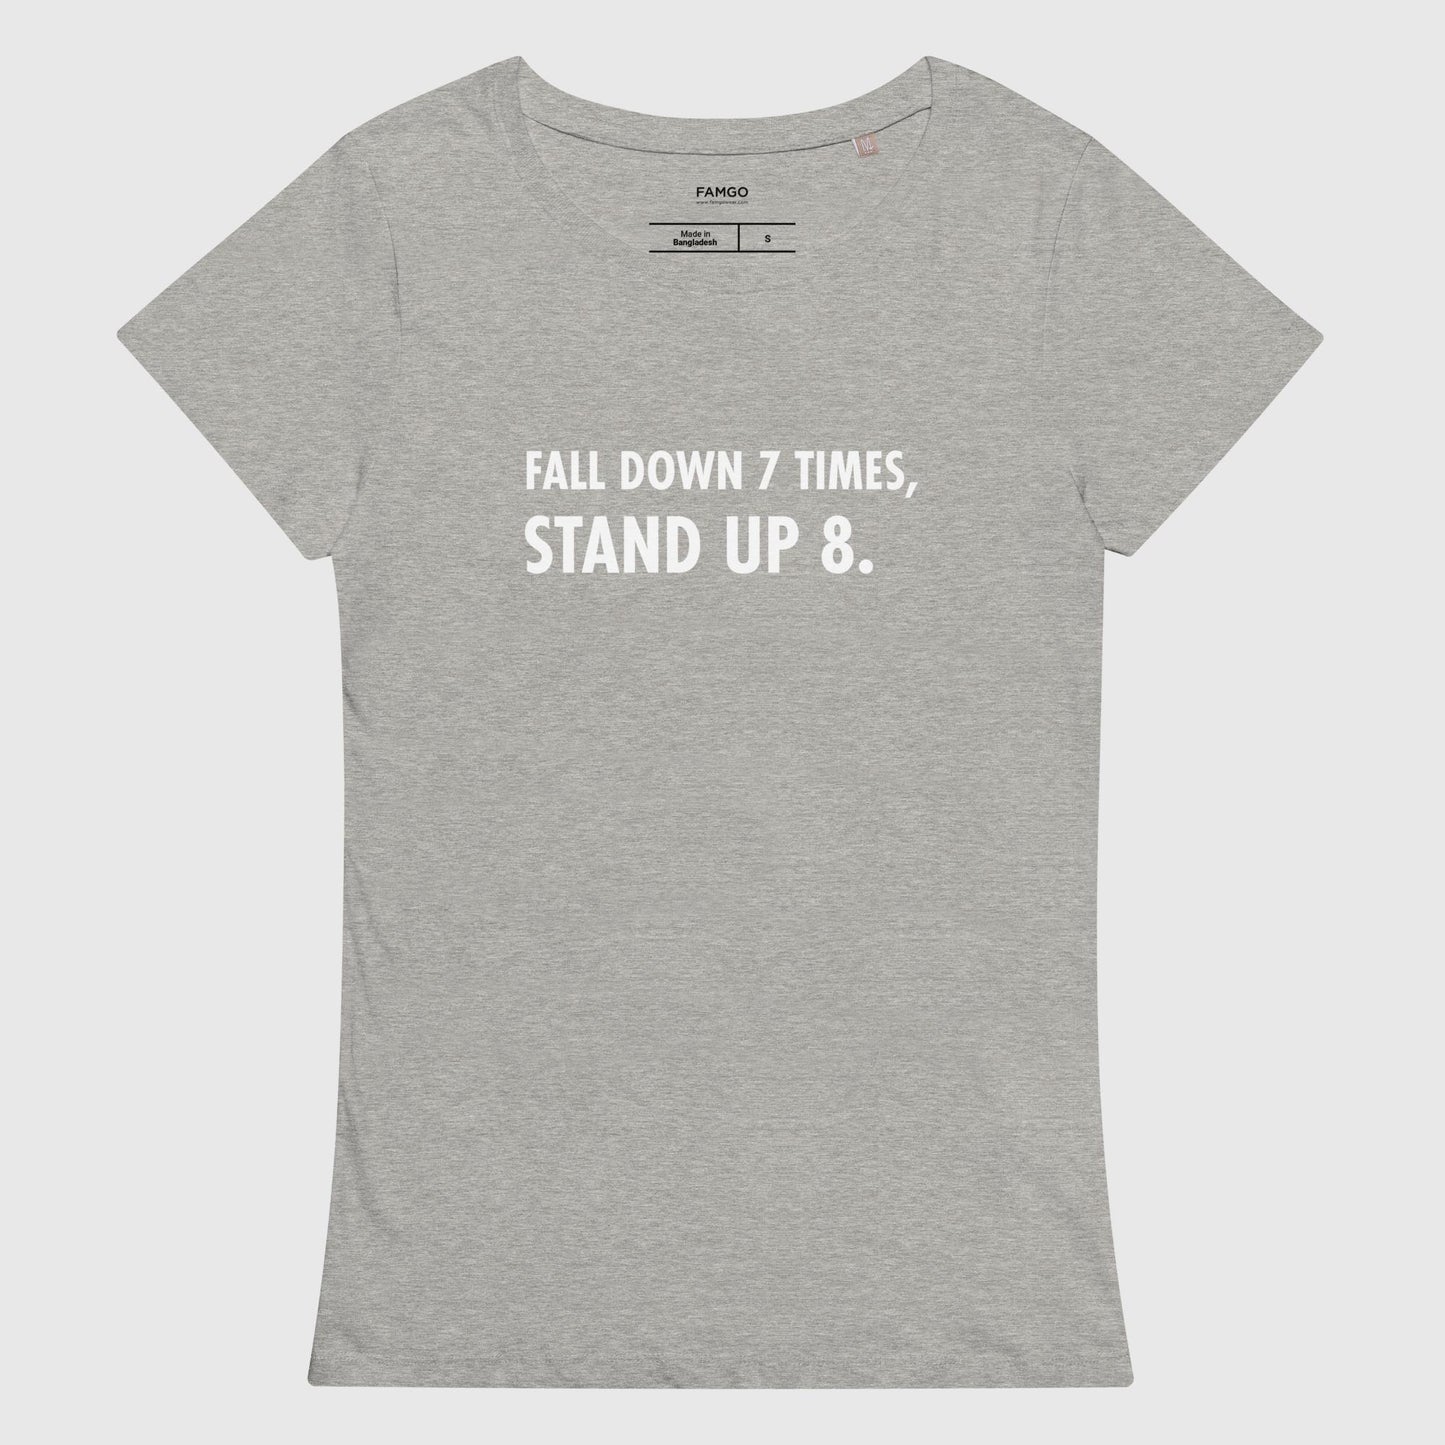 Women's gray melange organic cotton t-shirt that features the Japanese proverb, "Fall Down 7 Times, Stand Up 8."